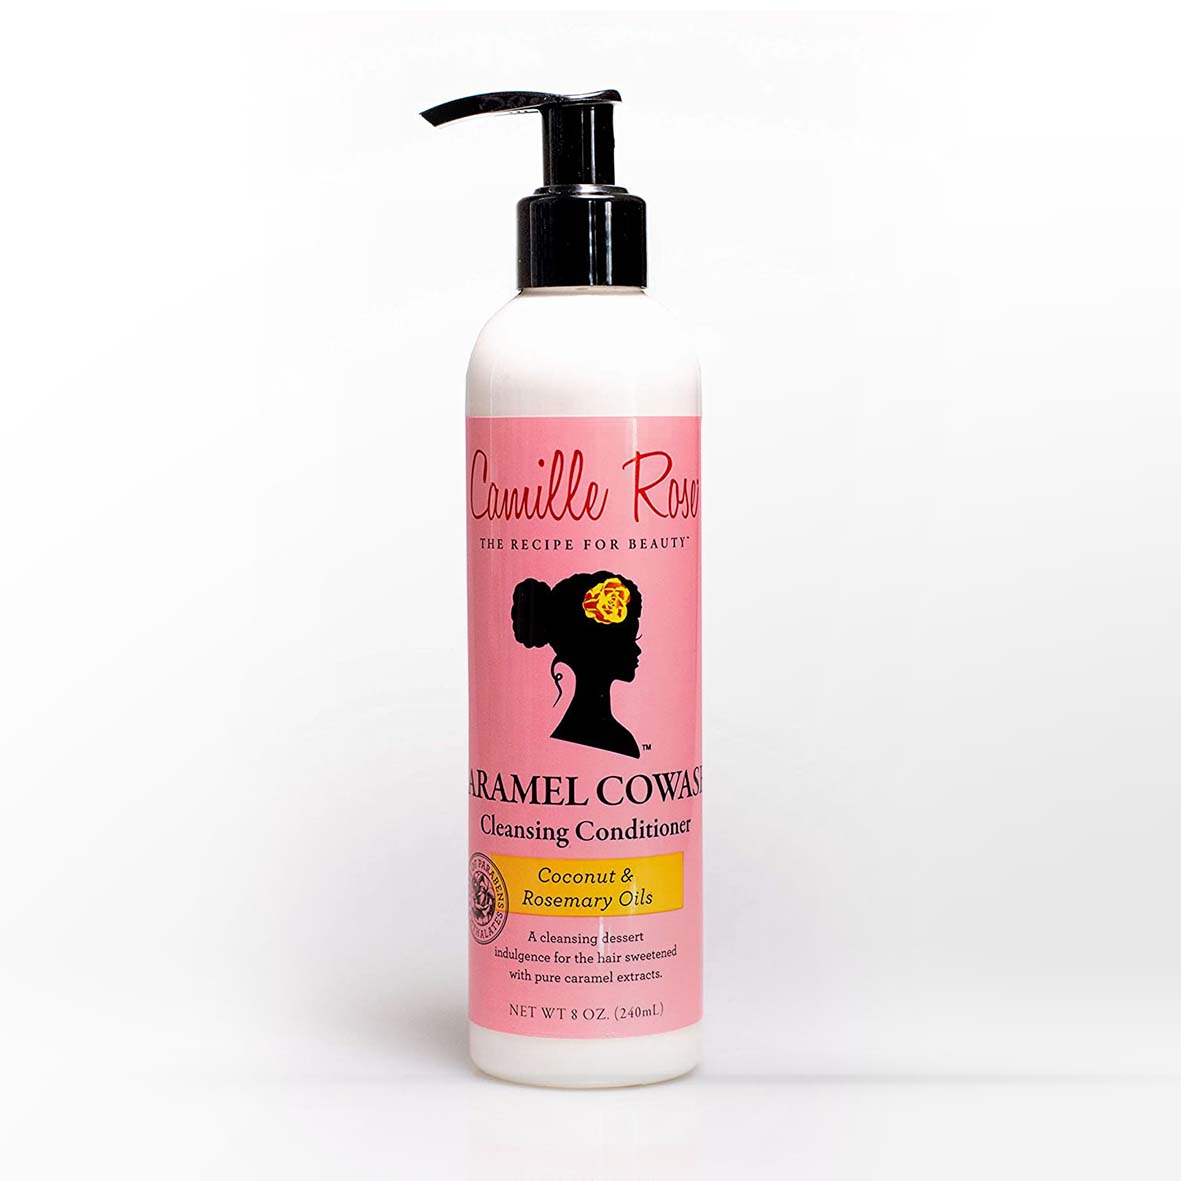 CAMILLE ROSE CARAMEL COWASH CLEANSING CONDITIONER COCONUT & ROSEMARY OIL